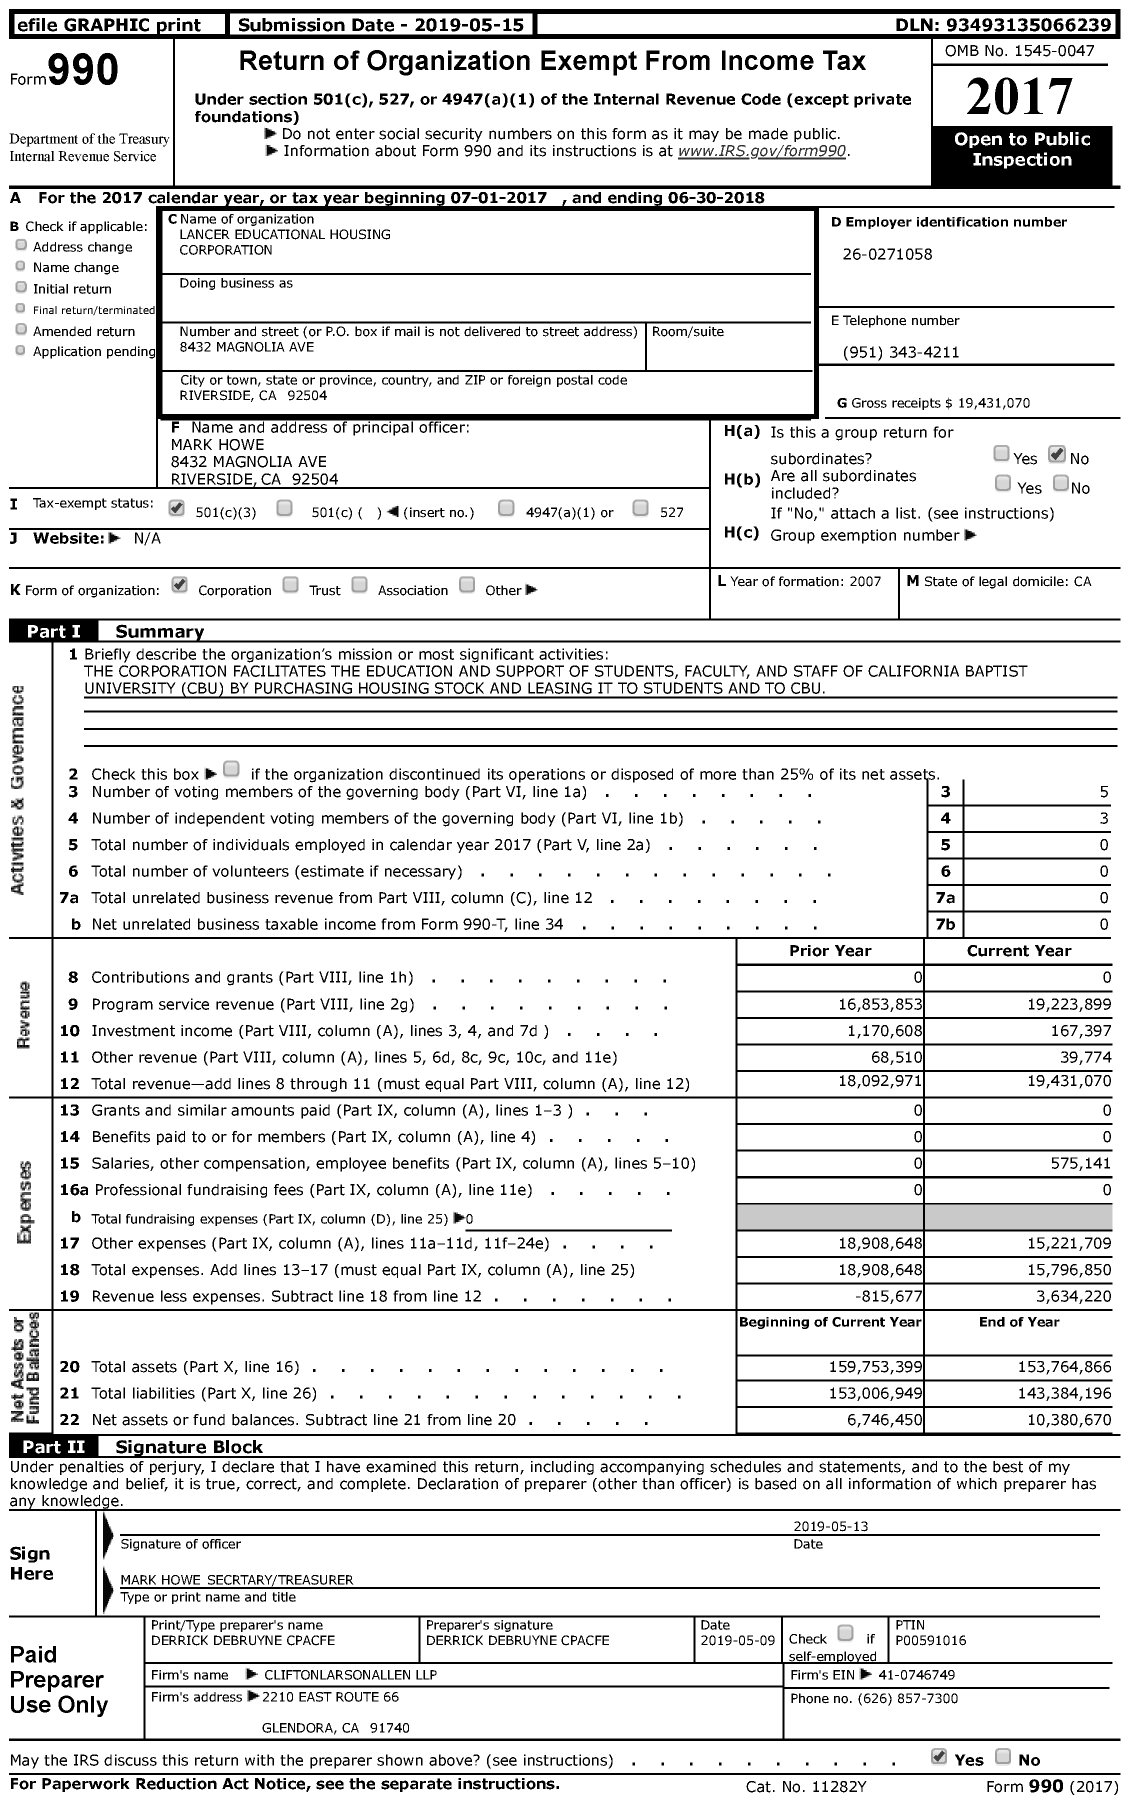 Image of first page of 2017 Form 990 for Lancer Educational Housing Corporation